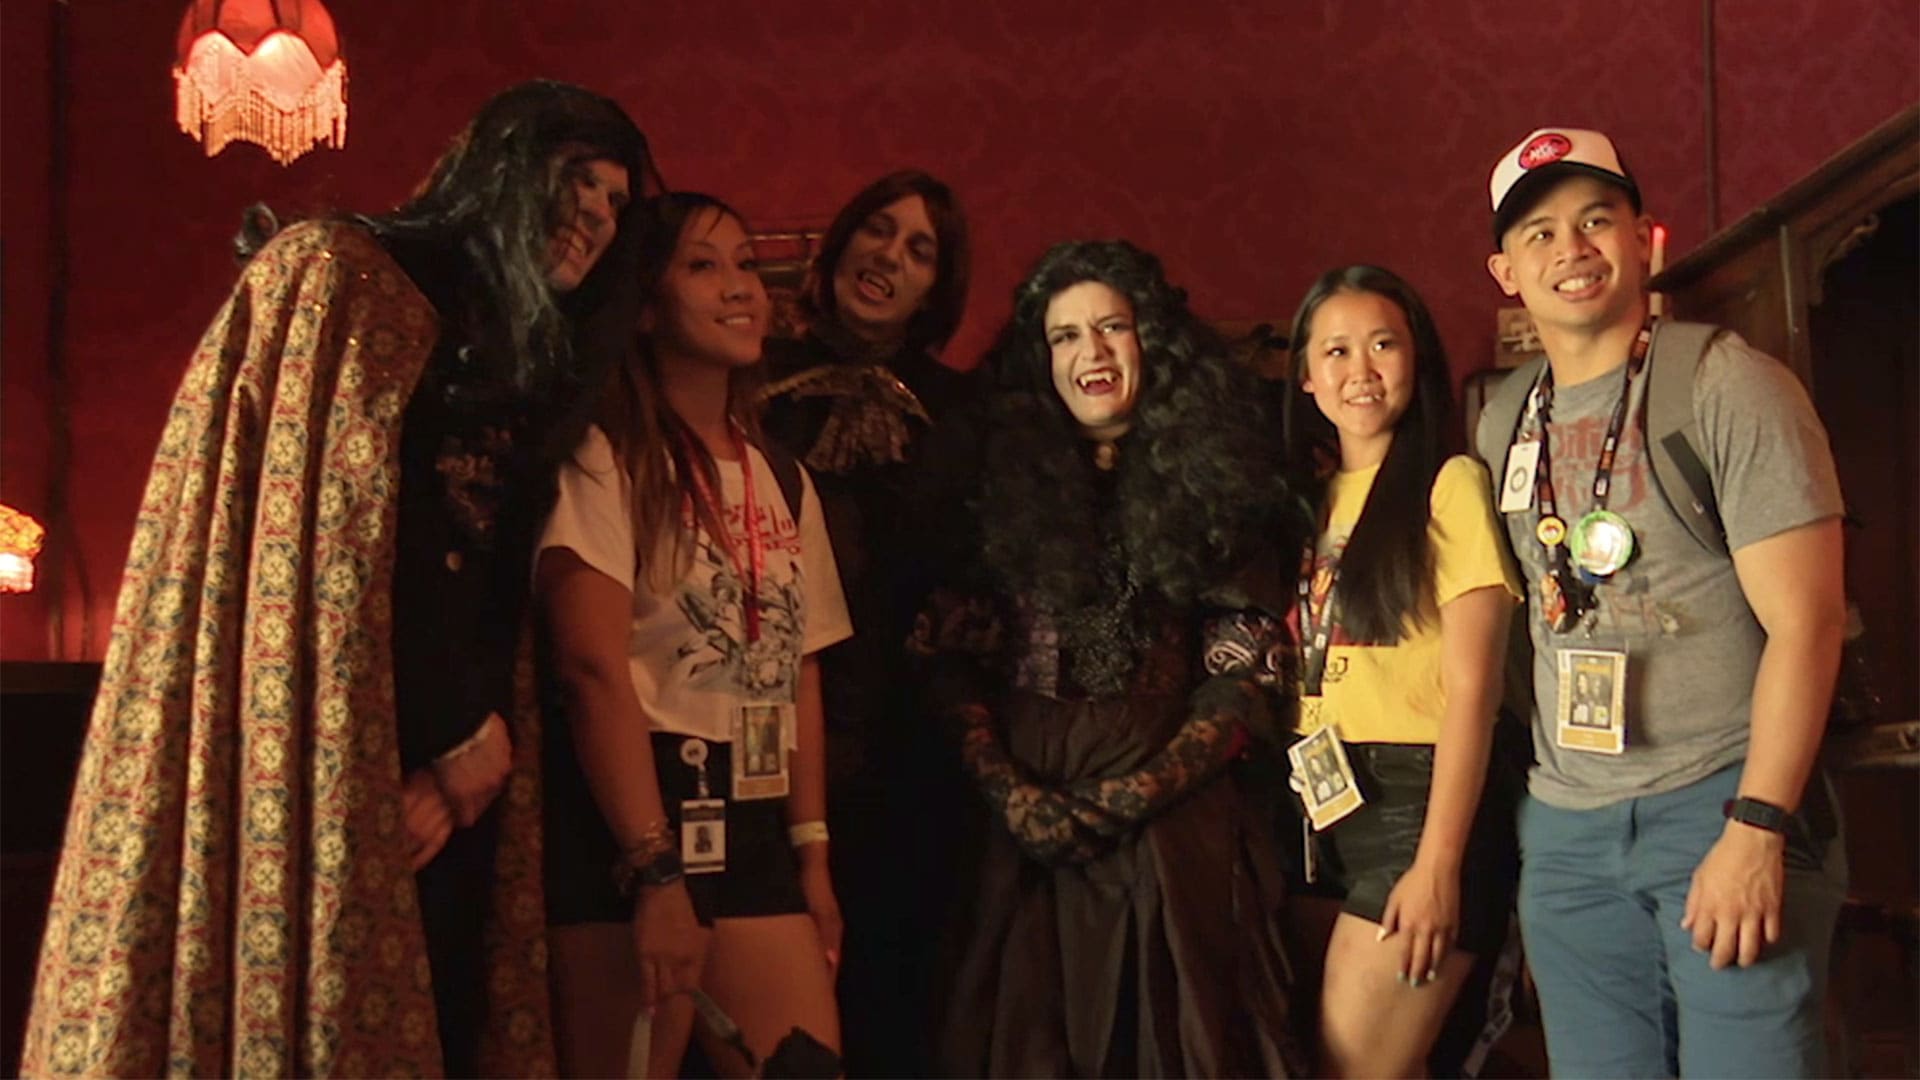 People dressed up as the What We Do in the Shadows cast smiling for a picture